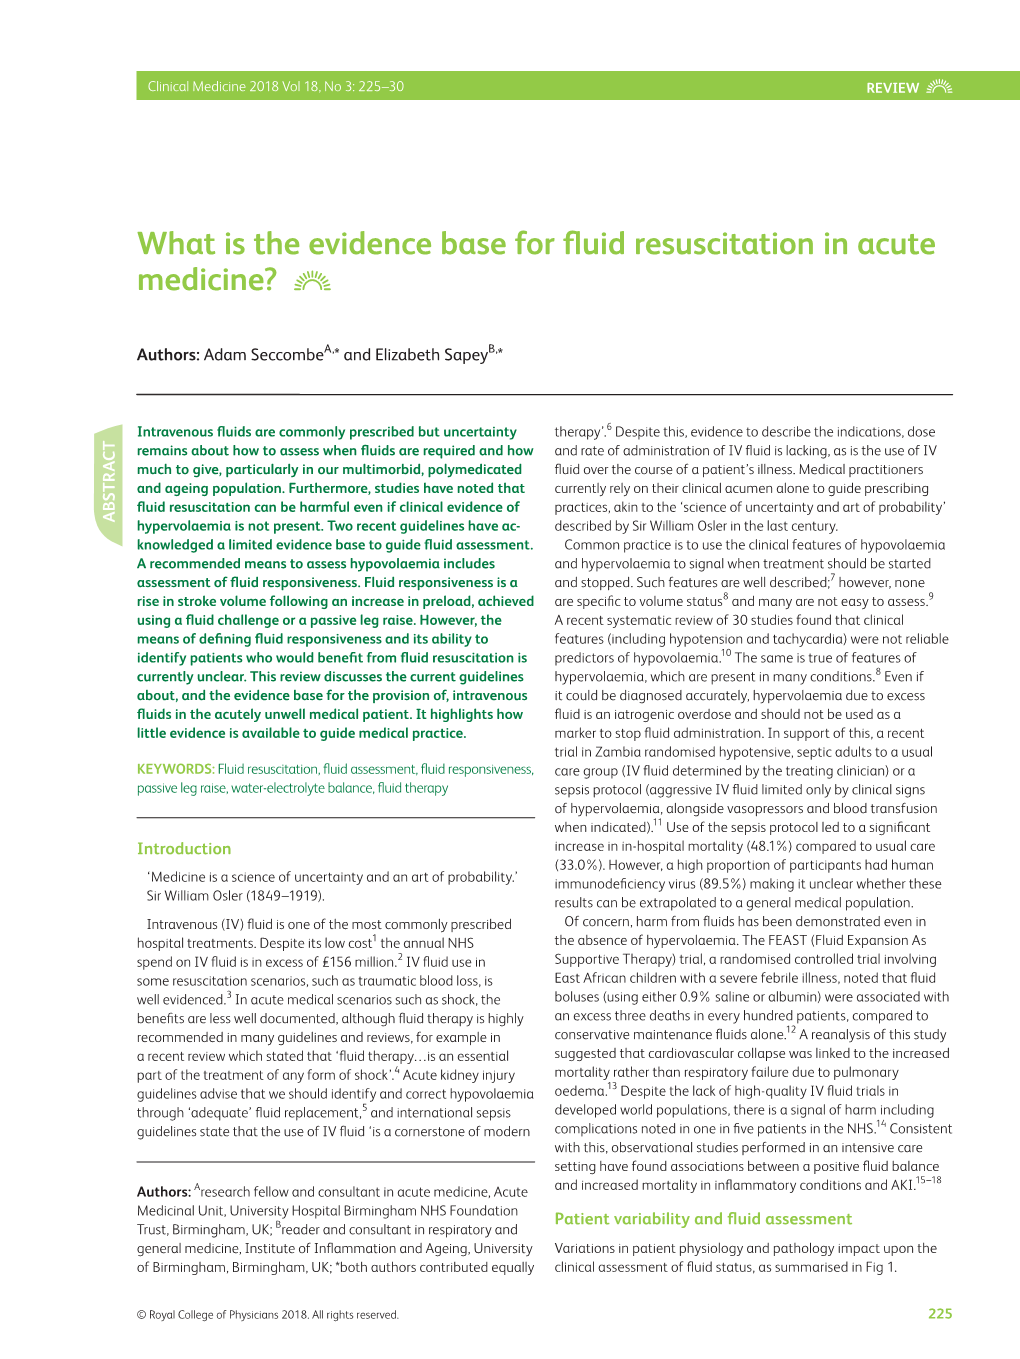 What Is the Evidence Base for Fluid Resuscitation in Acute Medicine?